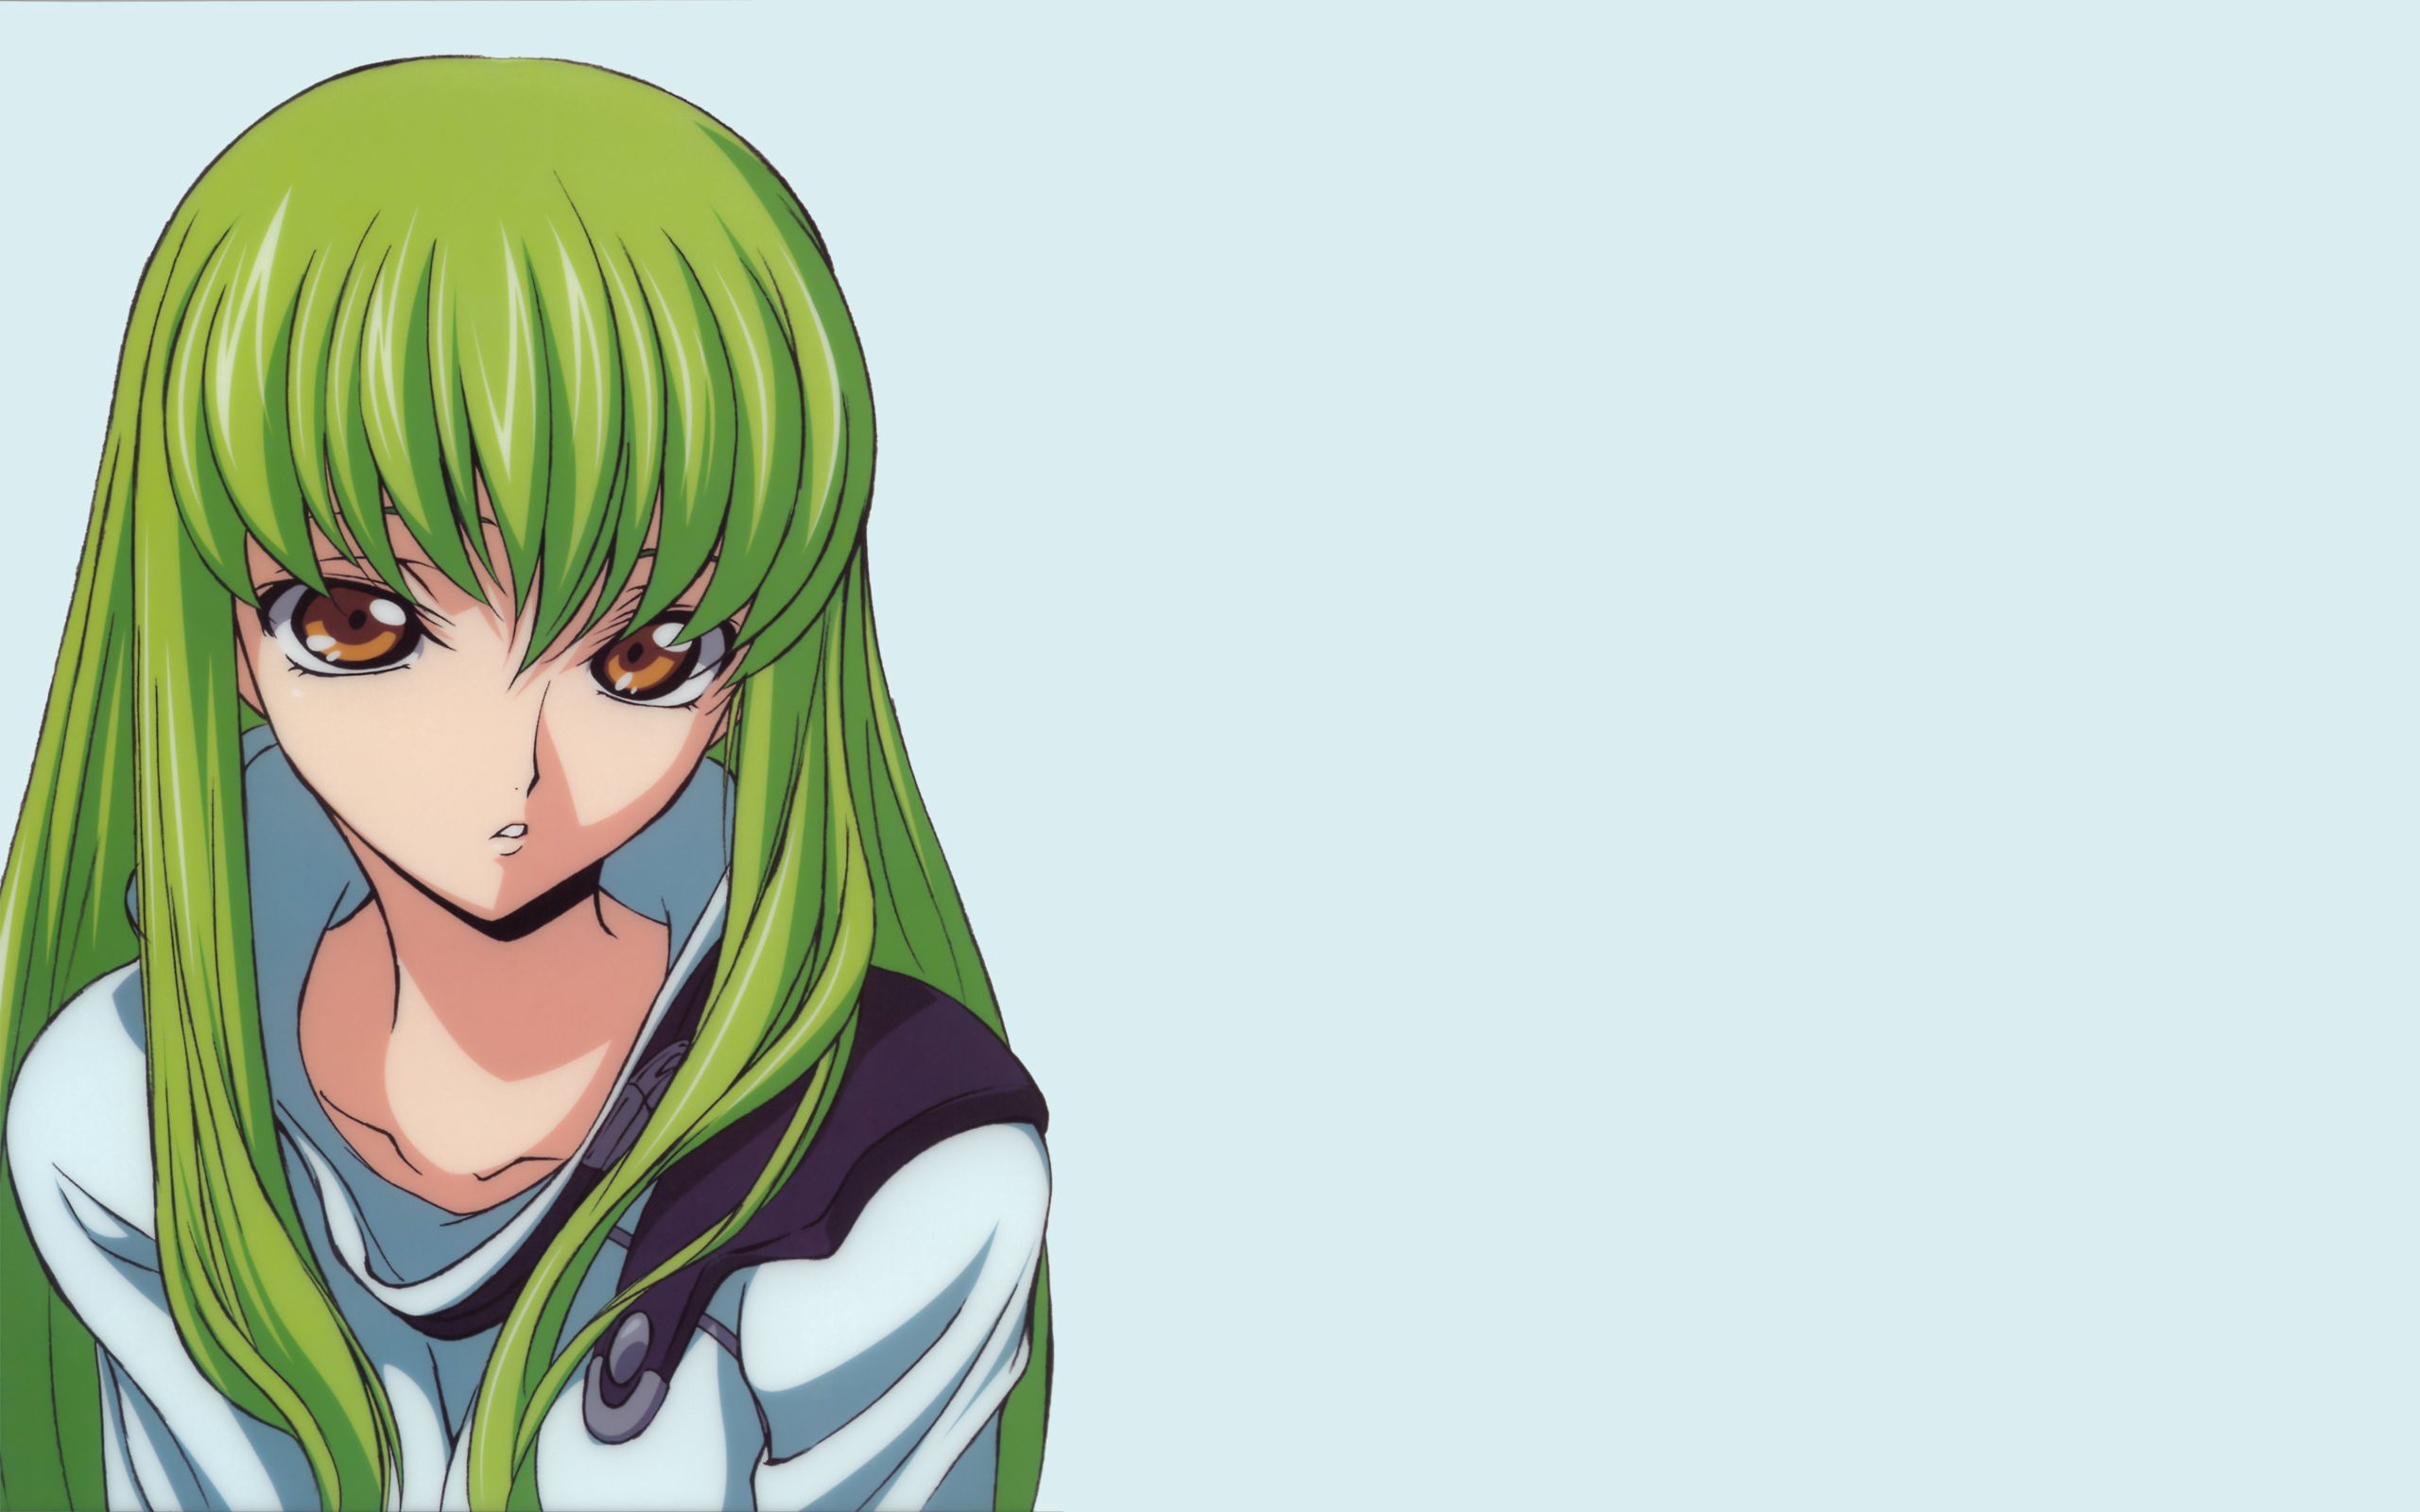 Download wallpaper 2560x1600 anime, girl, green, color, hair hd background